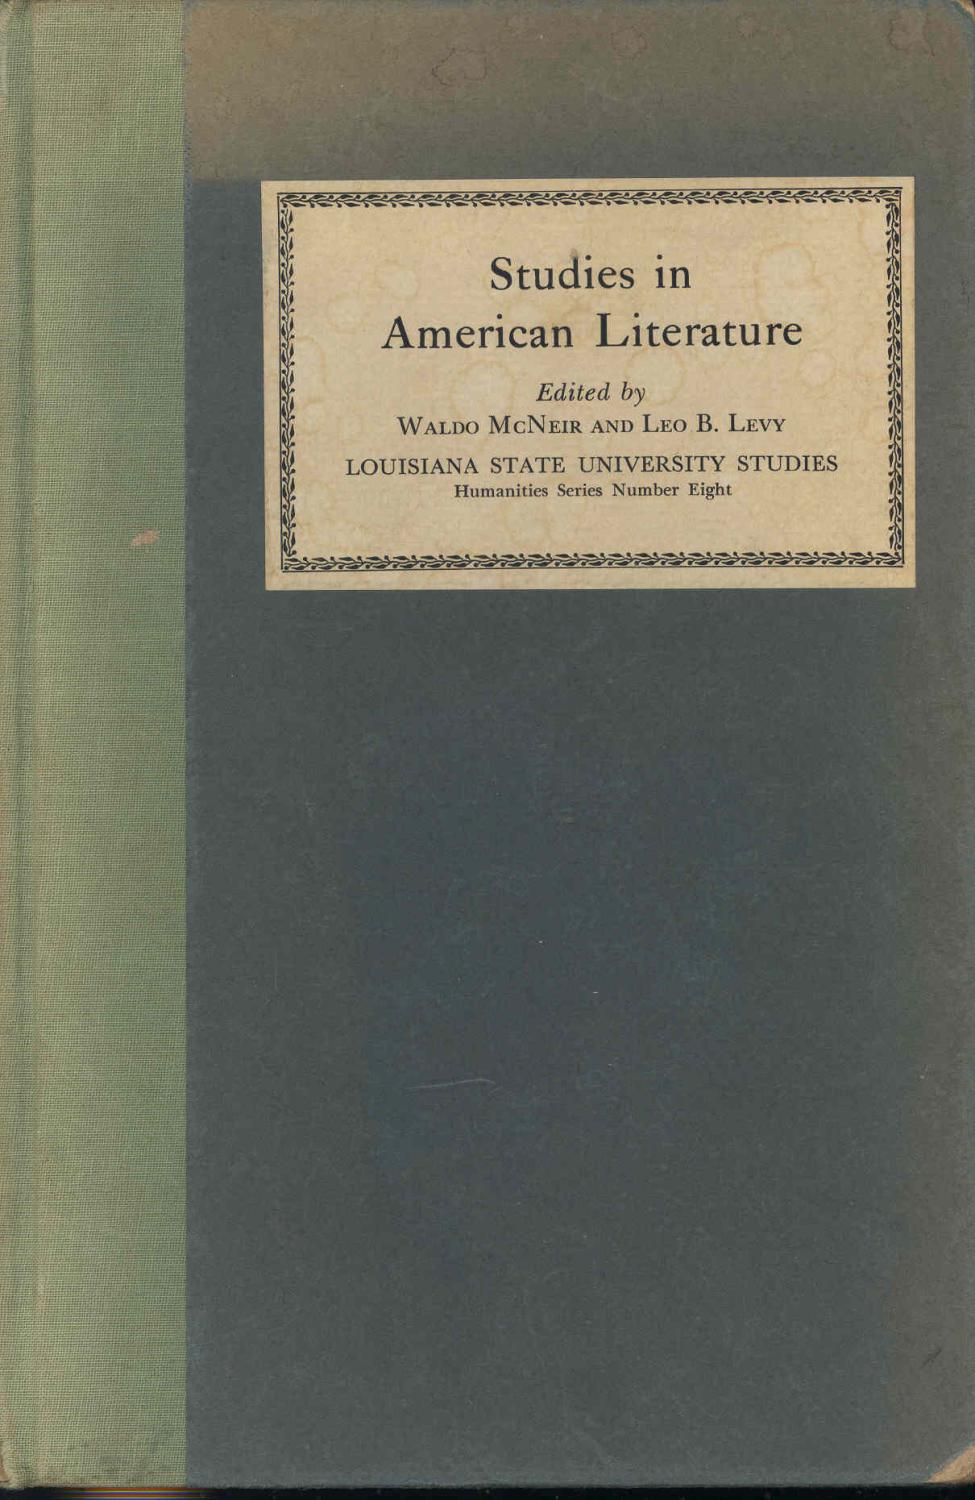 Studies in American Literature.[Louisiana State University Studies, Humanities Series;no. 8][Puritan Poet Preacher: Edward Taylor; Emerson's Political Quandary; Melville's Benito Cereno; Isabel Archer; Prufrock; E E Cummings; Faulkner; (The Puritan poet a